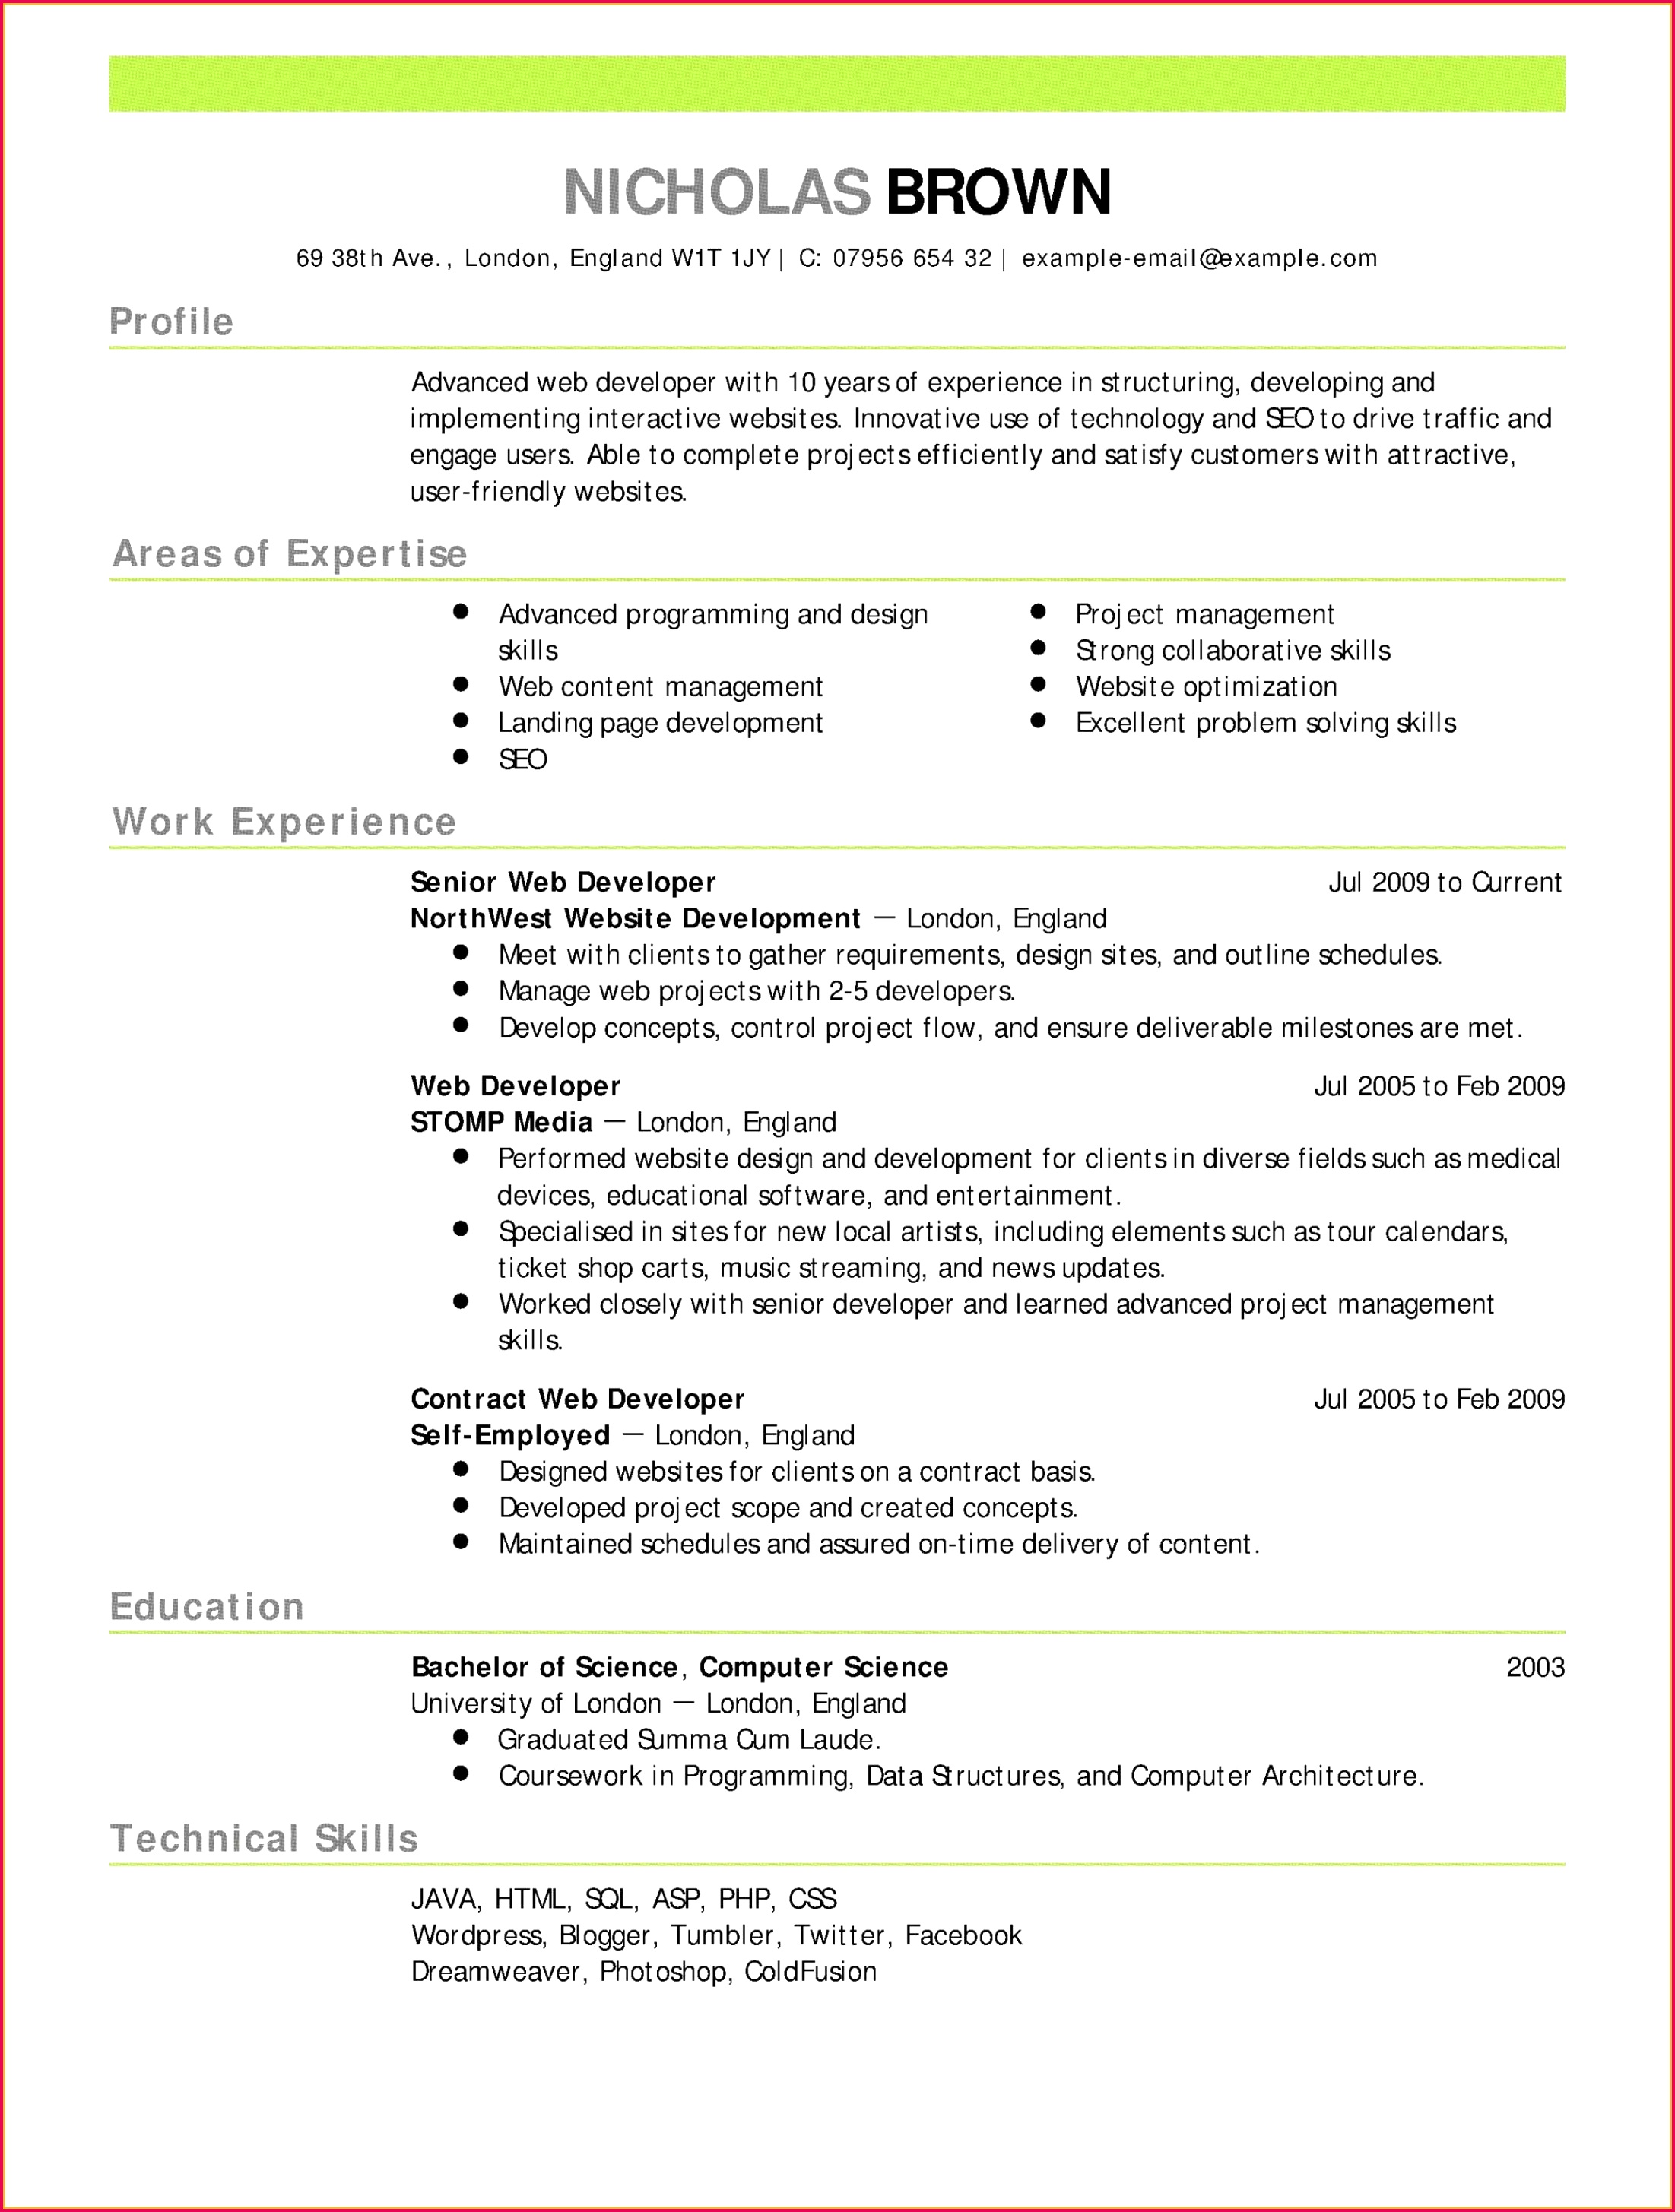 how to write a resume format unique resume format website unique birth certificate maker sample design of how to write a resume format